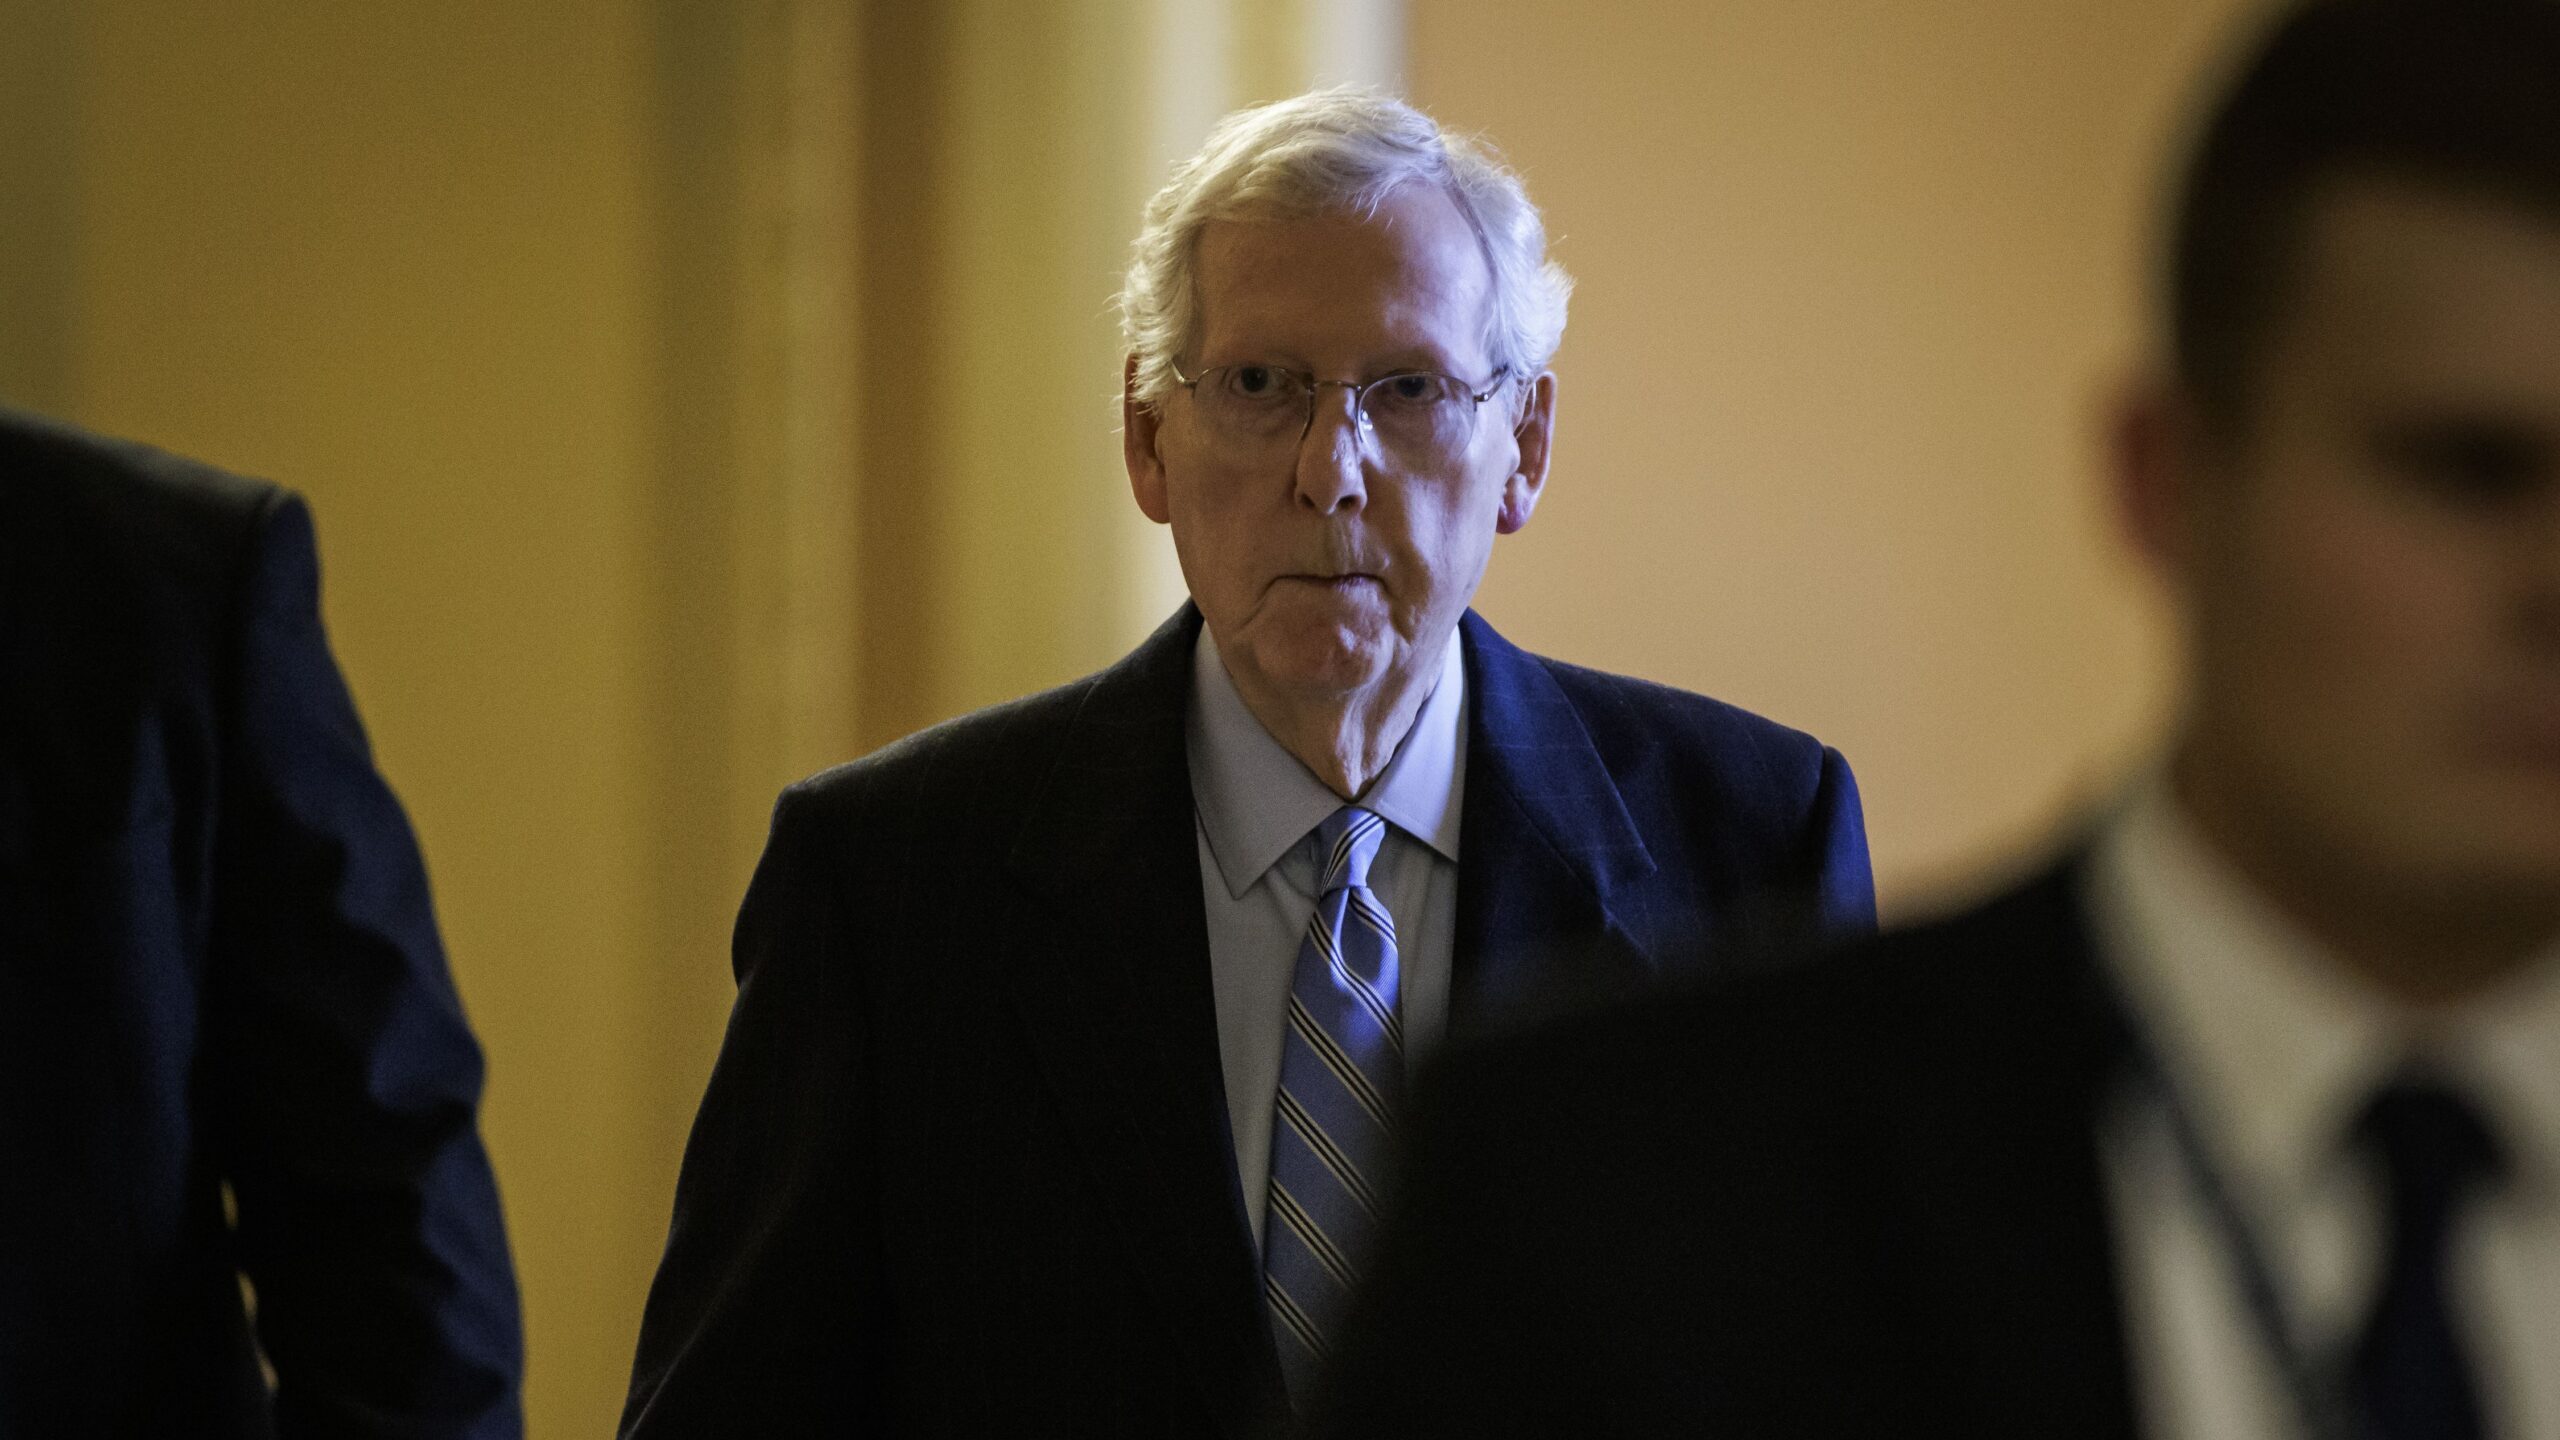 Senate Minority Leader Mitch McConnell (R-KY) heads to the floor of the Senate for a vote on Capito...